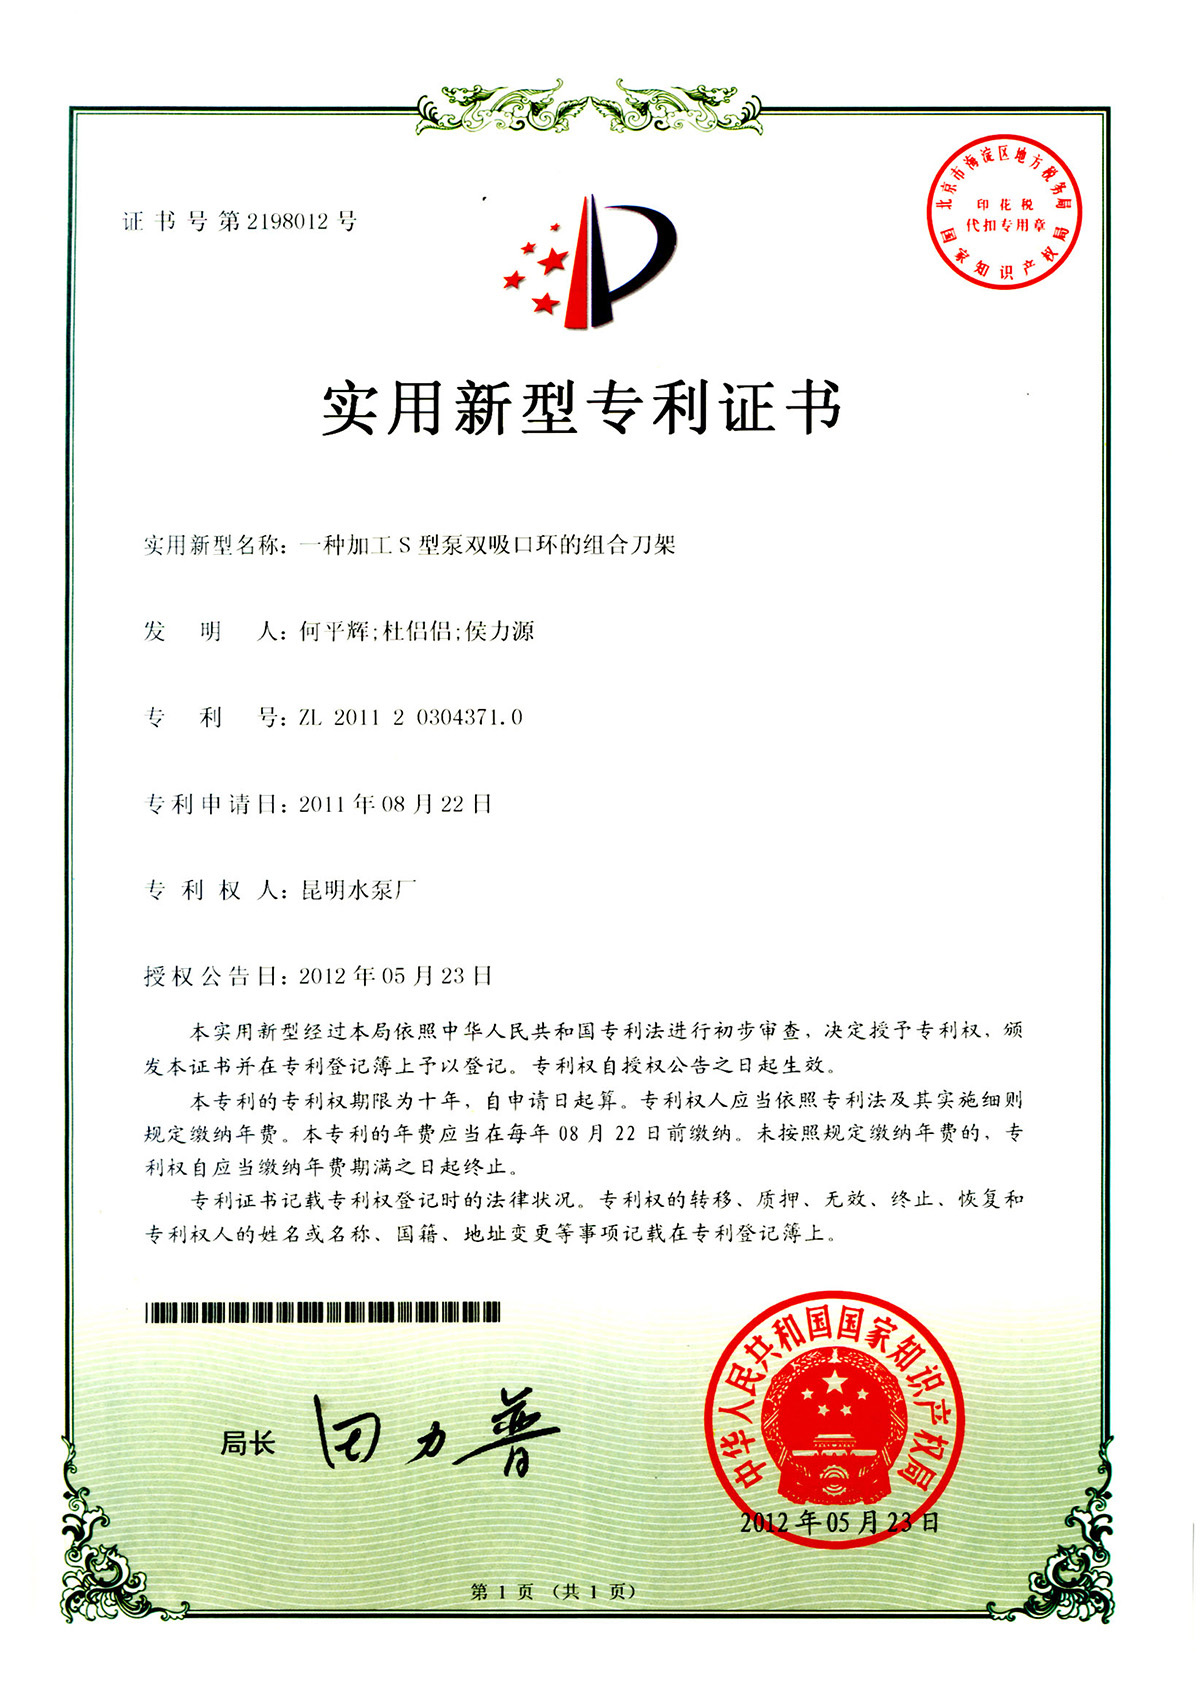 Patent certificate of combined tool rest for machining double suction ring of S pump